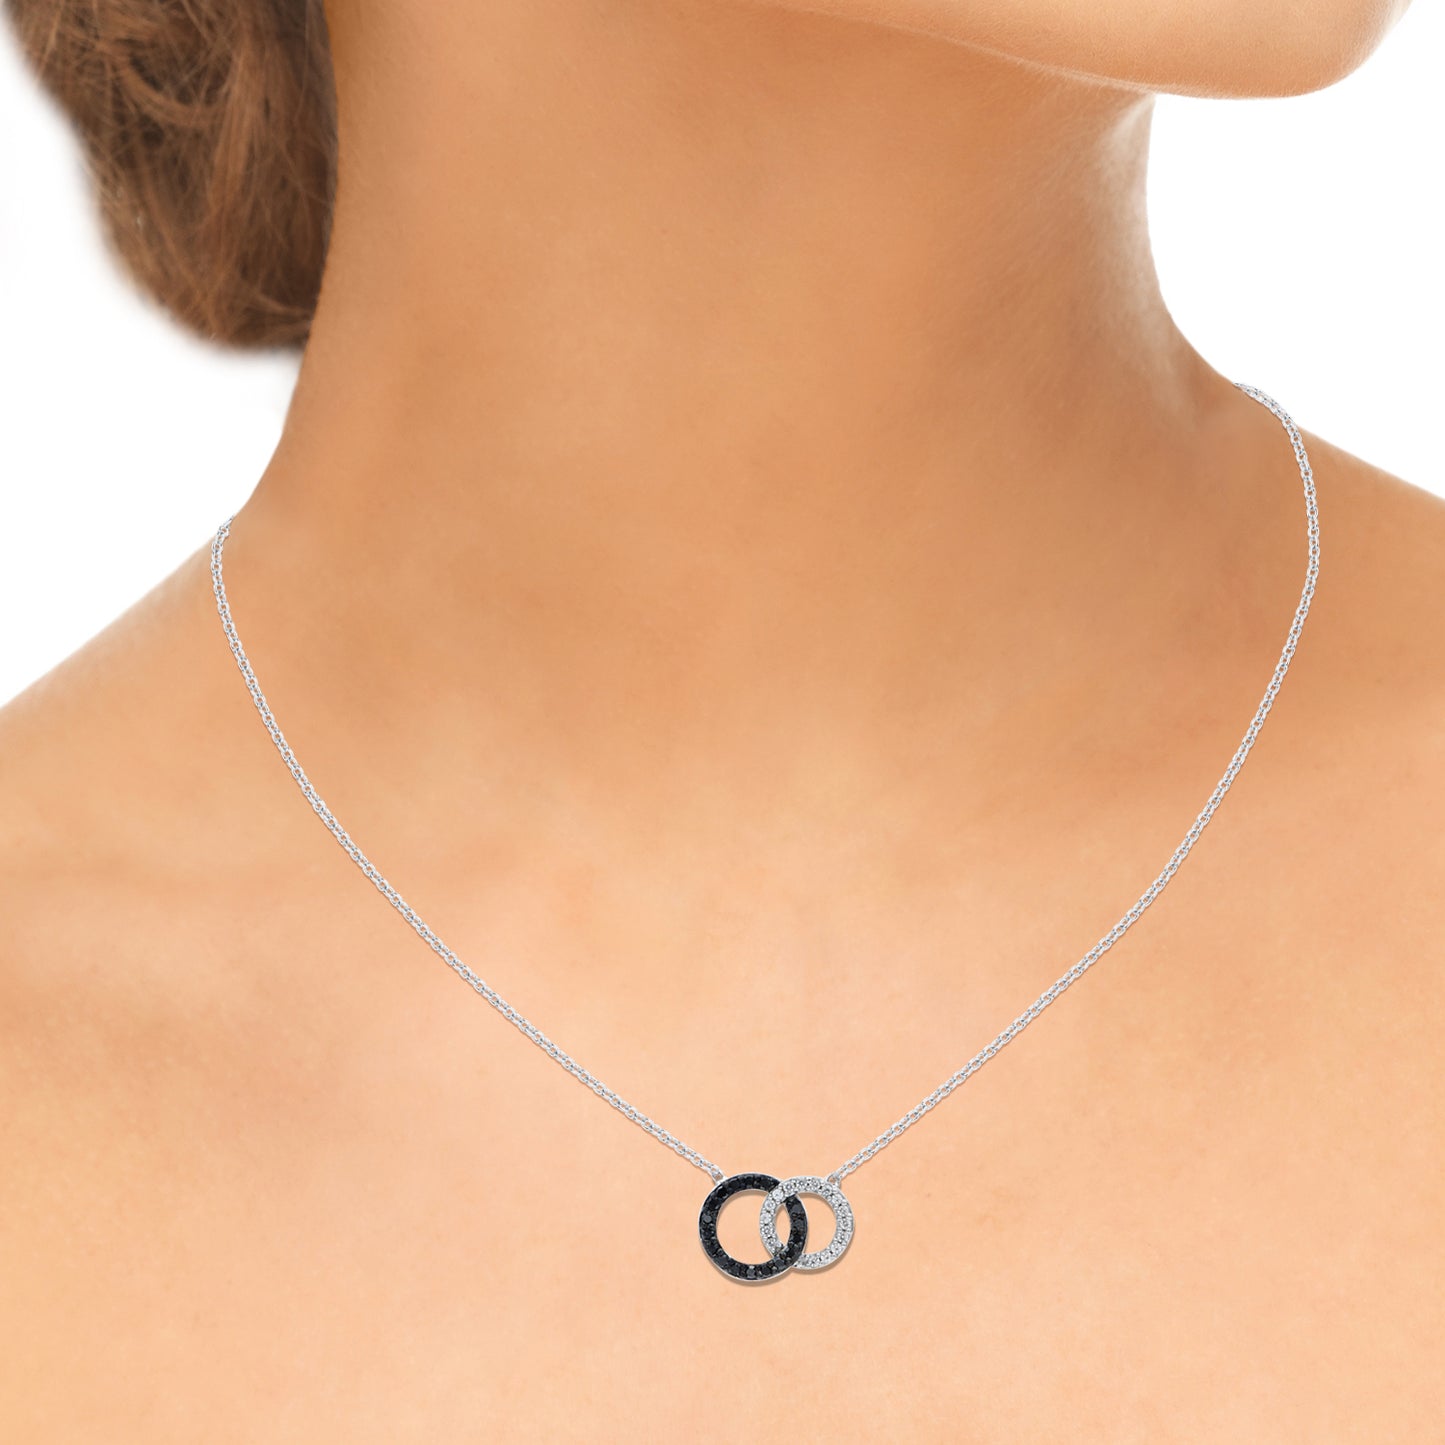 Treated Black Diamond Intertwined Circle Pendant Necklace in 925 Sterling Silver